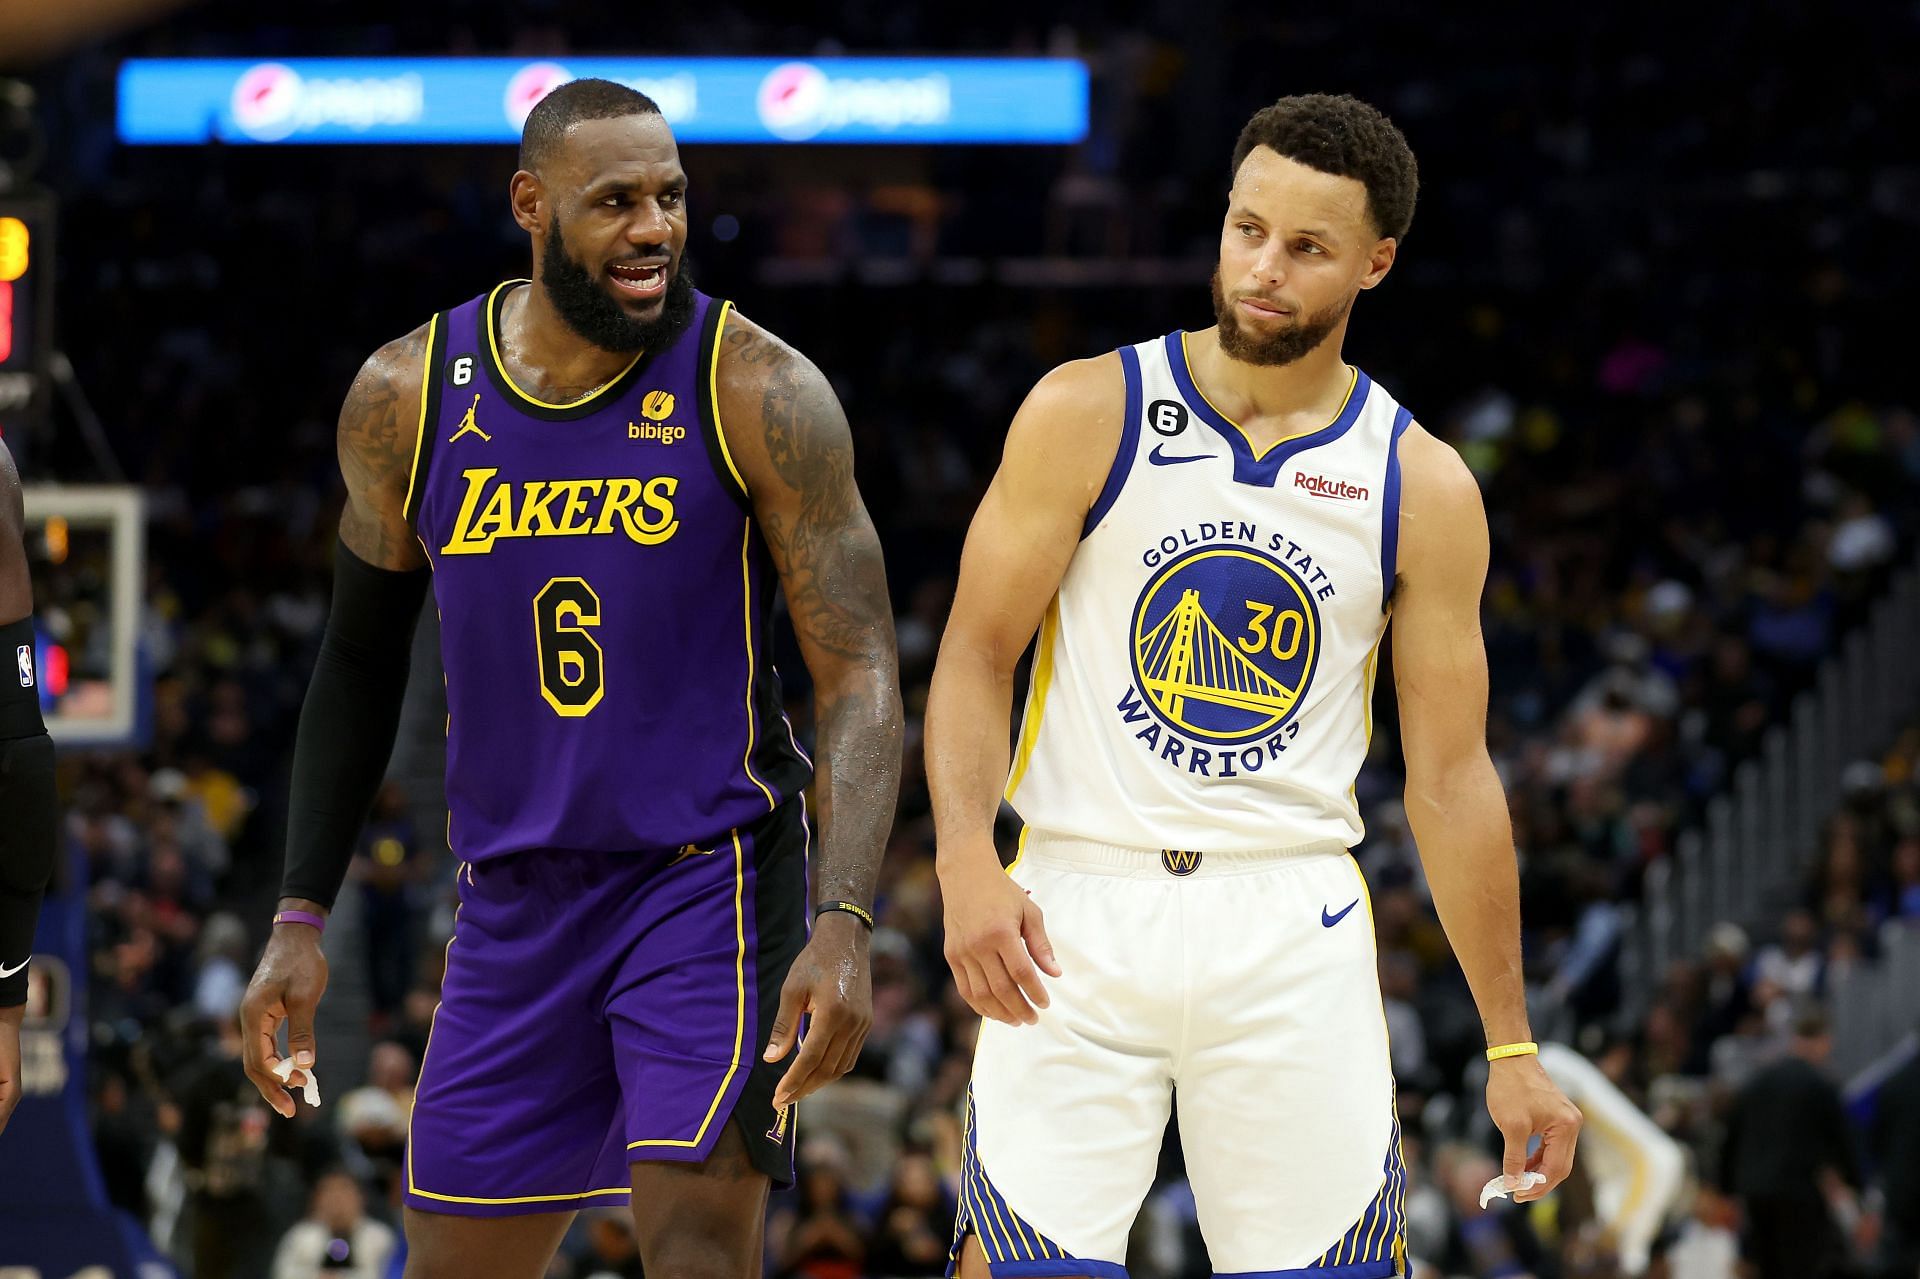 Warriors to open 2022-23 NBA season with matchup against Lakers / News 